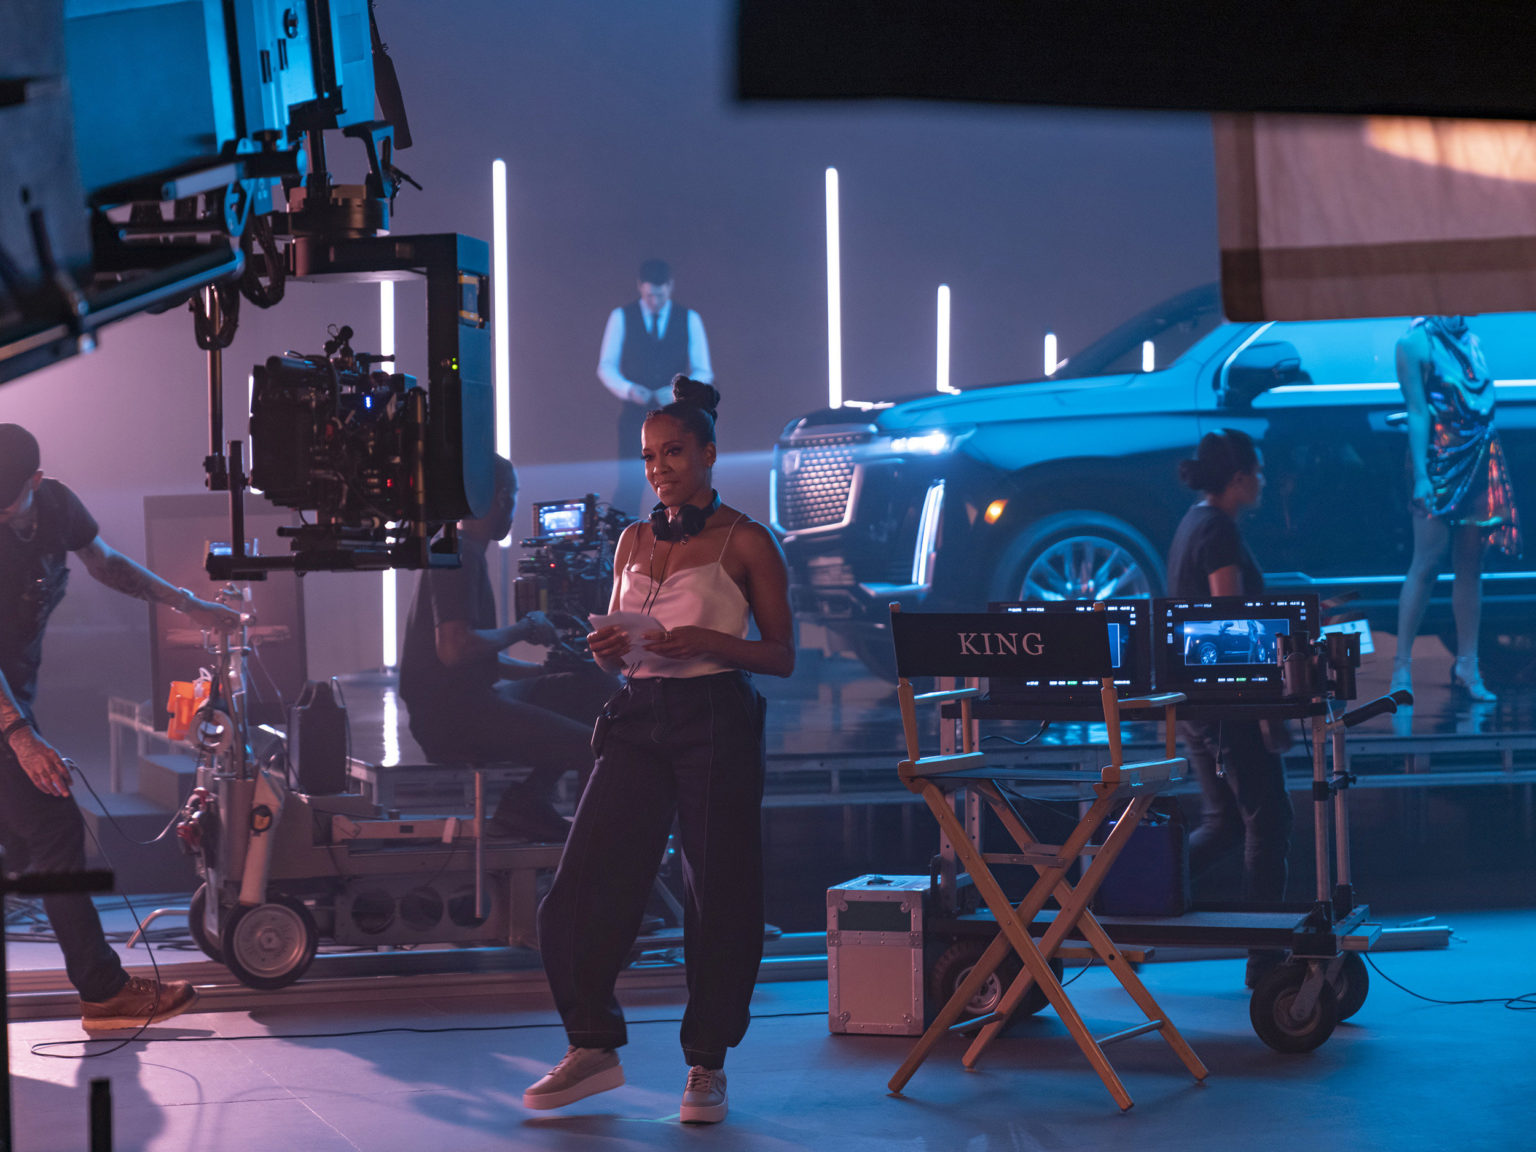 A new ad campaign features the Cadillac Escalade alongside Emmy- and Oscar-winning actress and director Regina King.